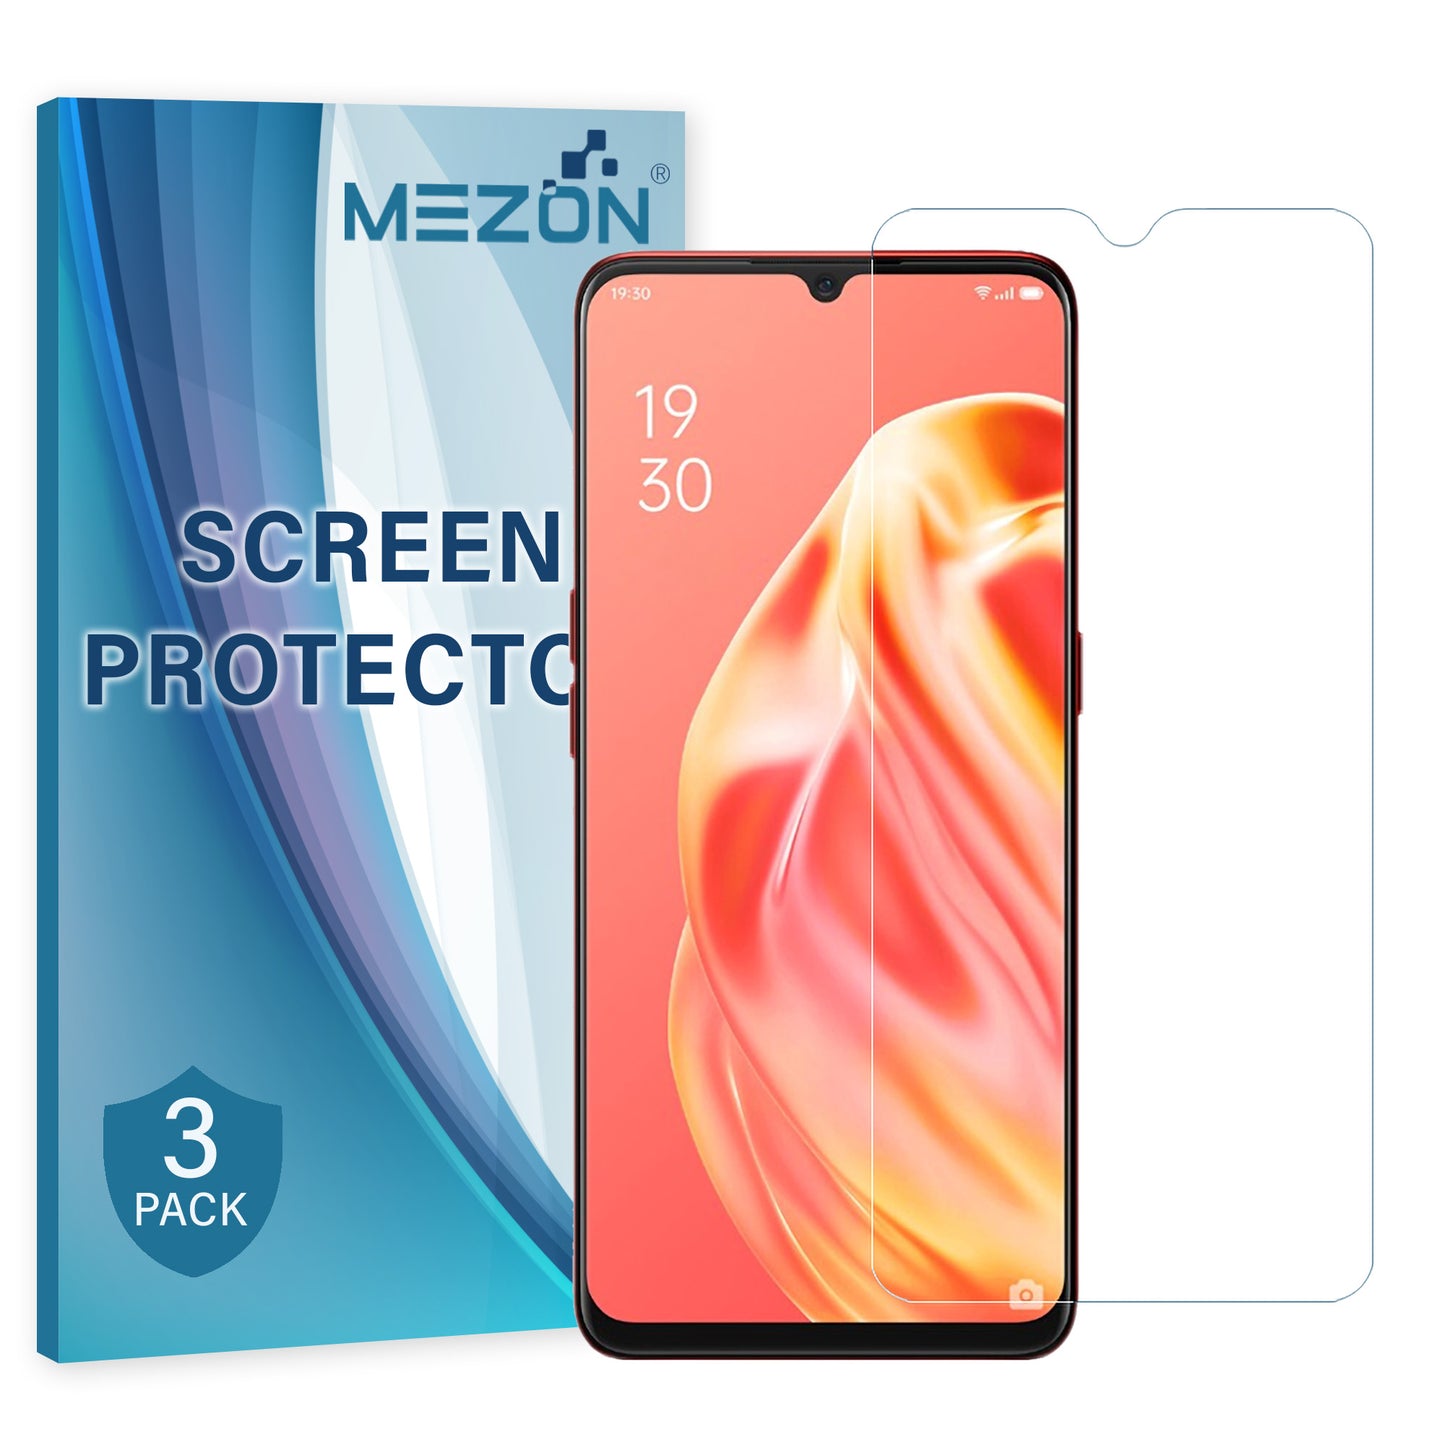 [3 Pack] MEZON Vivo Y3s (2021) Ultra Clear Screen Protector Case Friendly Film (Vivo Y3s, Clear)